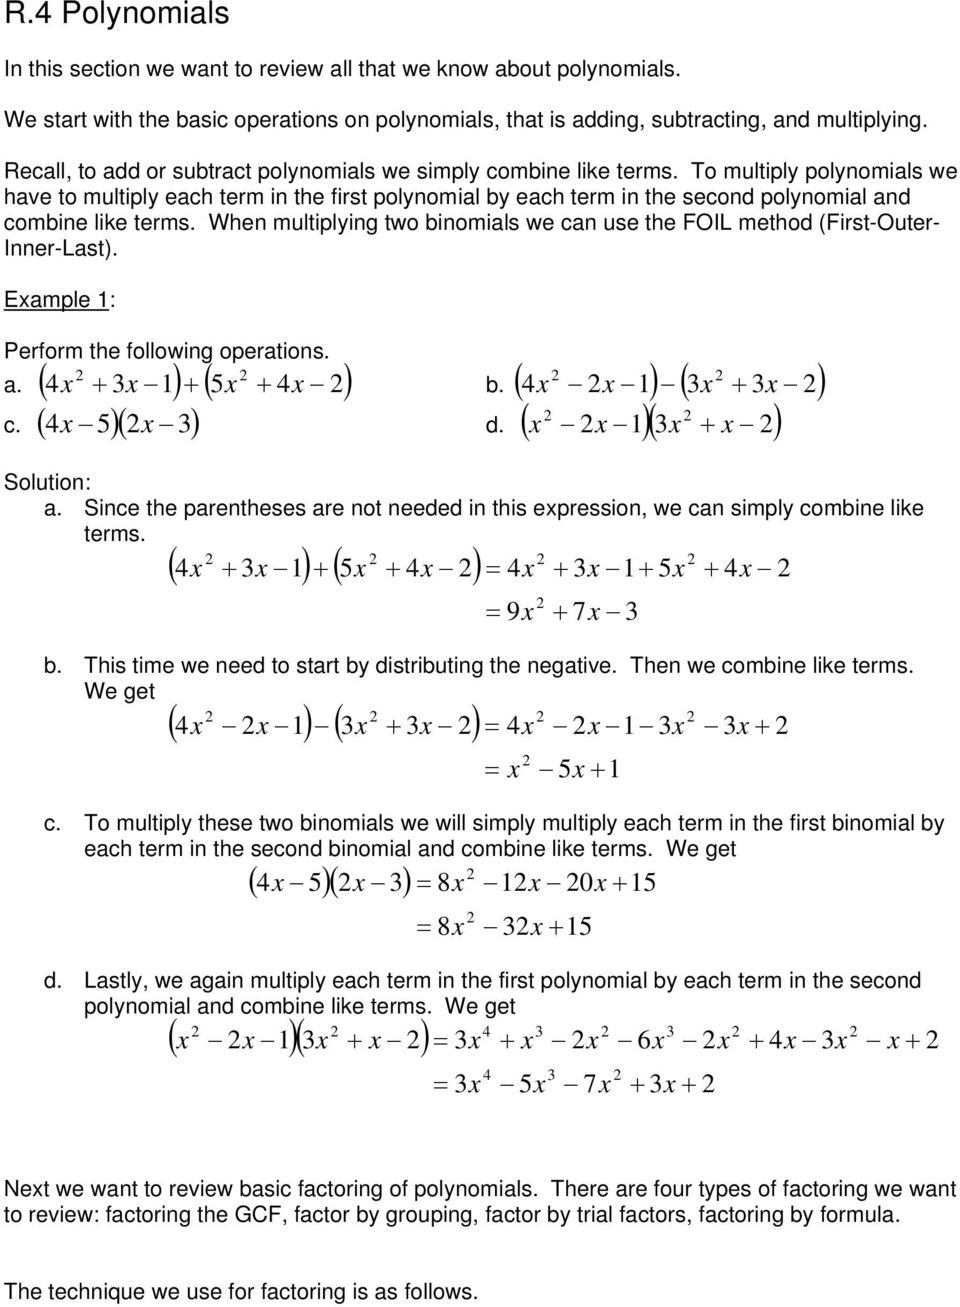 Operations With Polynomials Worksheet — db-excel.com